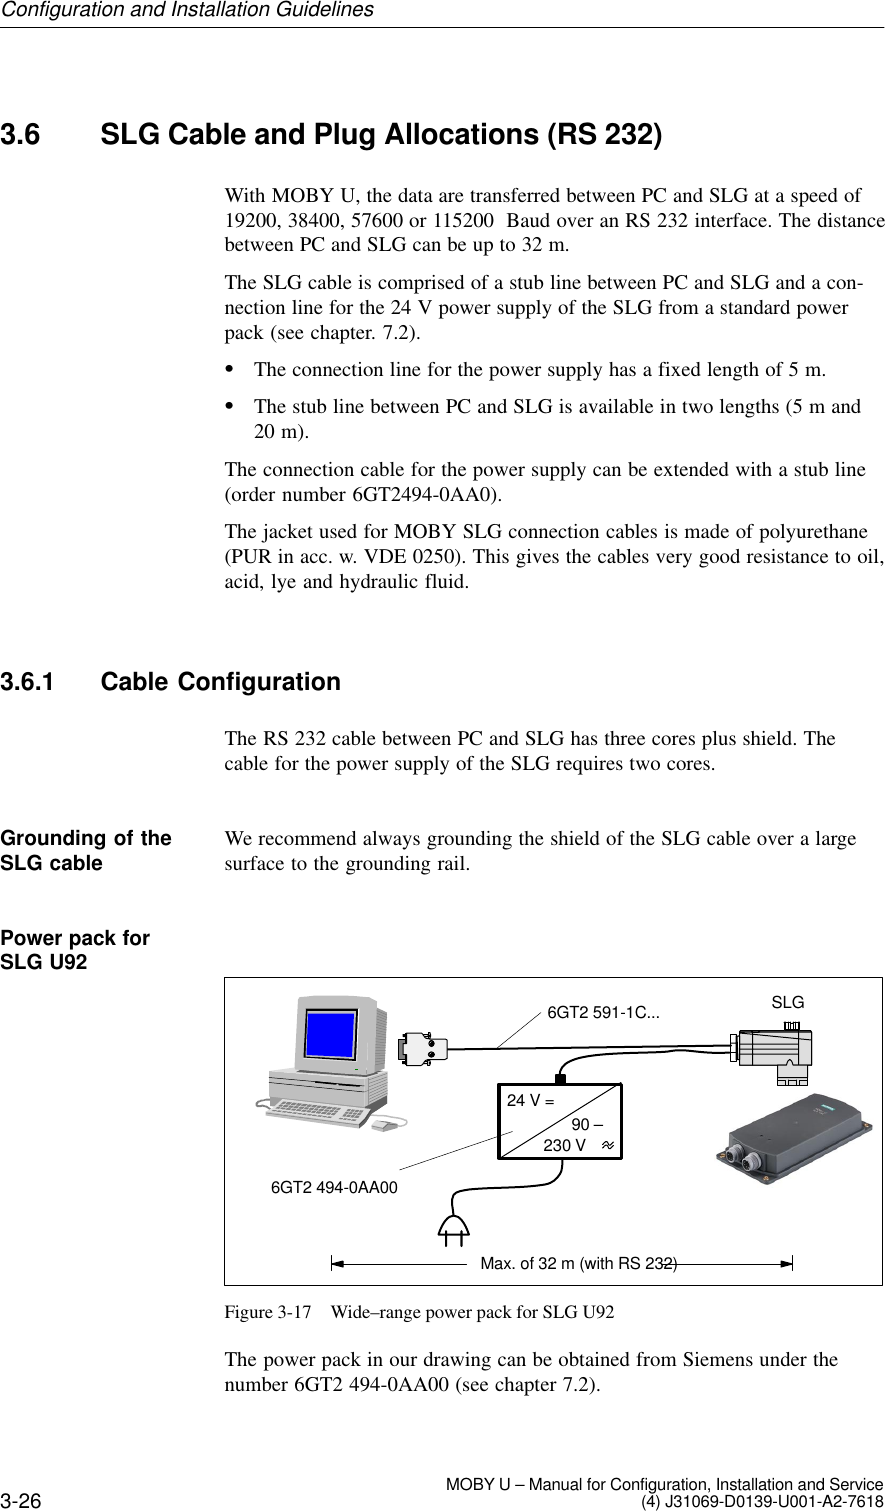 3-26 MOBY U – Manual for Configuration, Installation and Service(4) J31069-D0139-U001-A2-76183.6 SLG Cable and Plug Allocations (RS 232)With MOBY U, the data are transferred between PC and SLG at a speed of19200, 38400, 57600 or 115200  Baud over an RS 232 interface. The distancebetween PC and SLG can be up to 32 m.The SLG cable is comprised of a stub line between PC and SLG and a con-nection line for the 24 V power supply of the SLG from a standard powerpack (see chapter. 7.2).SThe connection line for the power supply has a fixed length of 5 m.SThe stub line between PC and SLG is available in two lengths (5 m and20 m).The connection cable for the power supply can be extended with a stub line(order number 6GT2494-0AA0).The jacket used for MOBY SLG connection cables is made of polyurethane(PUR in acc. w. VDE 0250). This gives the cables very good resistance to oil,acid, lye and hydraulic fluid.3.6.1 Cable ConfigurationThe RS 232 cable between PC and SLG has three cores plus shield. Thecable for the power supply of the SLG requires two cores.We recommend always grounding the shield of the SLG cable over a largesurface to the grounding rail.230 VSLGMax. of 32 m (with RS 232)24 V =90 –6GT2 494-0AA006GT2 591-1C...Figure 3-17 Wide–range power pack for SLG U92The power pack in our drawing can be obtained from Siemens under thenumber 6GT2 494-0AA00 (see chapter 7.2).Grounding of theSLG cablePower pack for SLG U92Configuration and Installation Guidelines